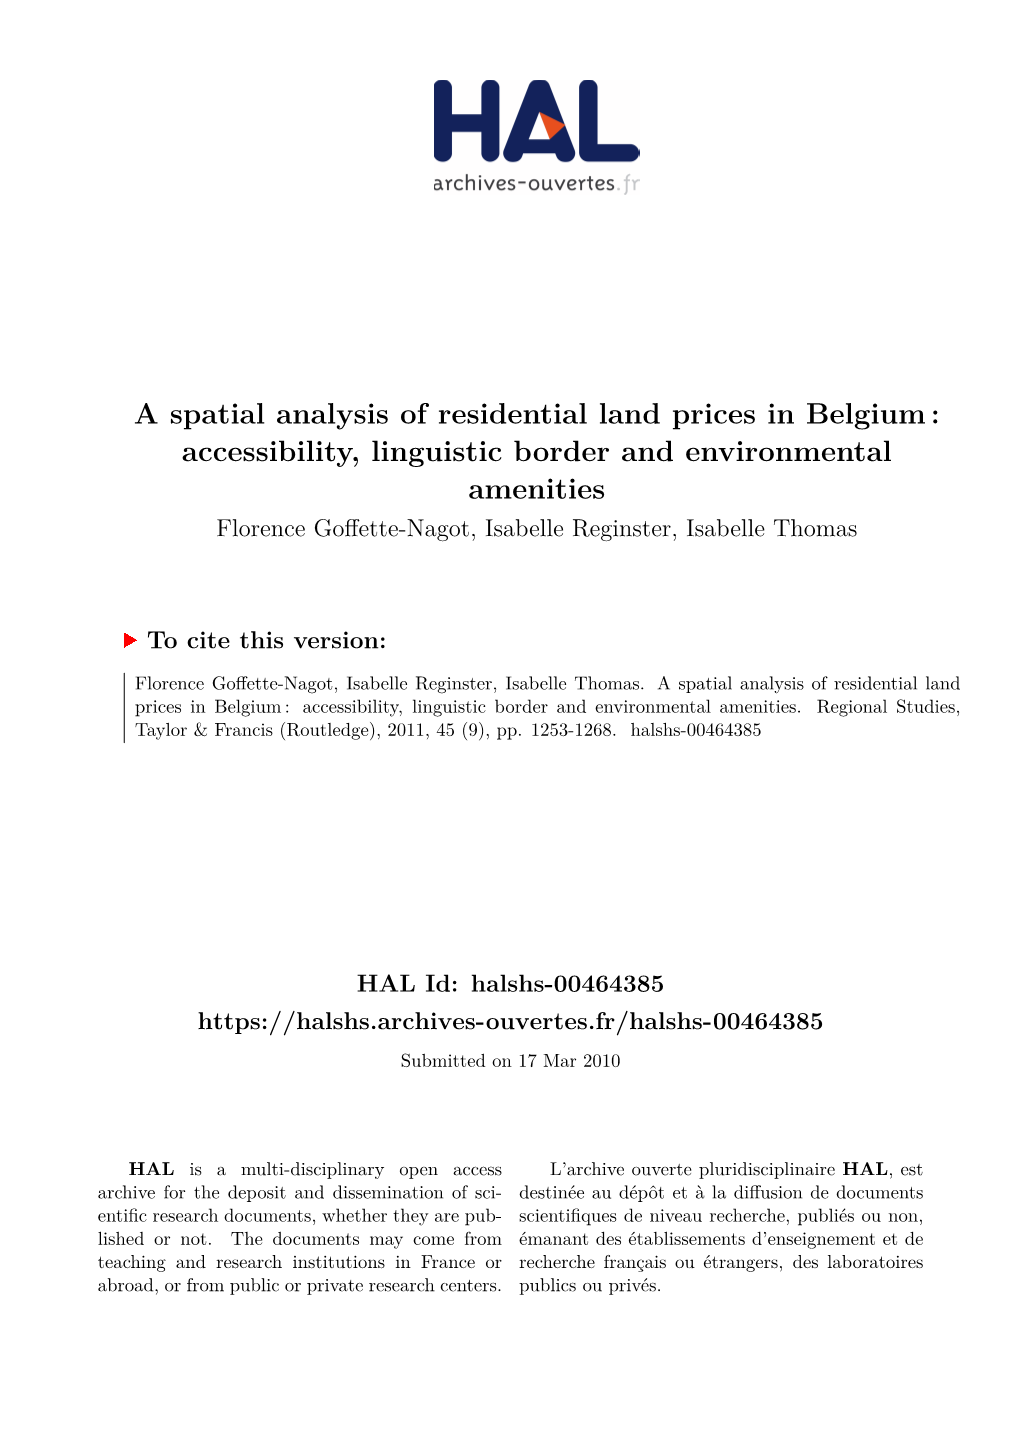 A Spatial Analysis of Residential Land Prices in Belgium